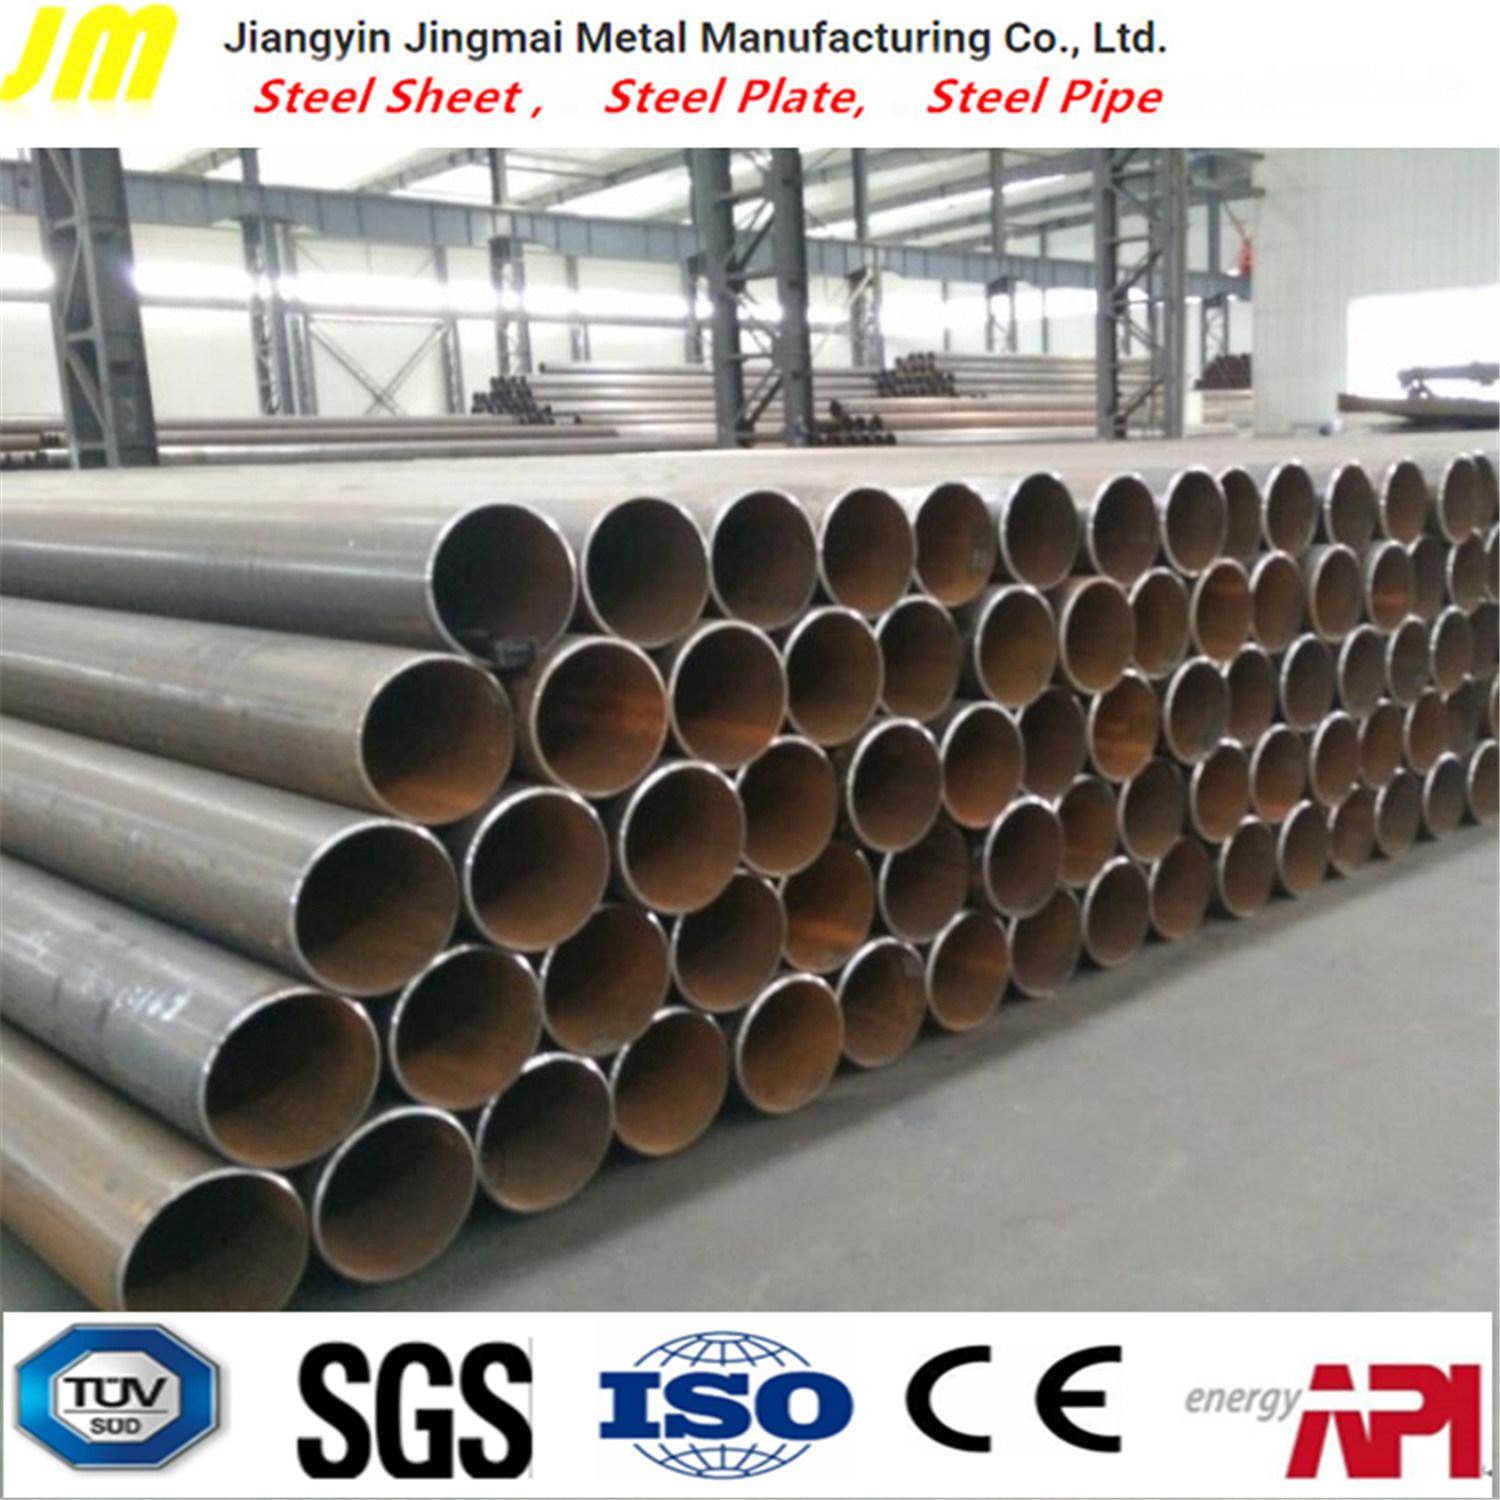 China Steel Pipes, Steel Tubes, Flanges, Valves, Pipe Fittings ...